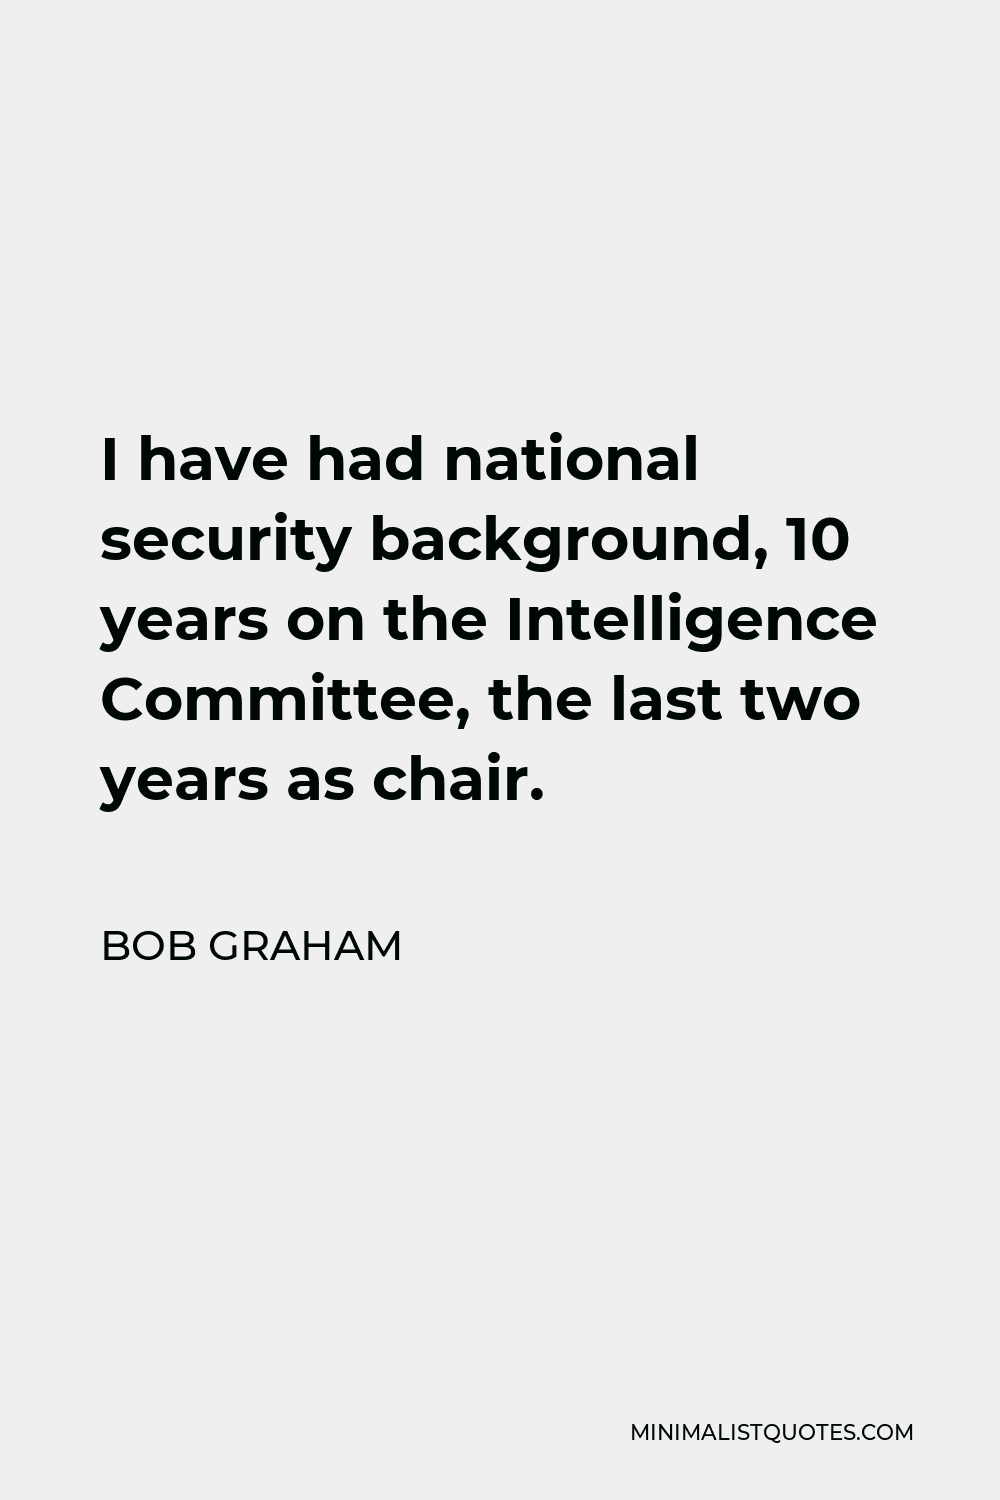 Bob Graham Quote - I have had national security background, 10 years on the Intelligence Committee, the last two years as chair.